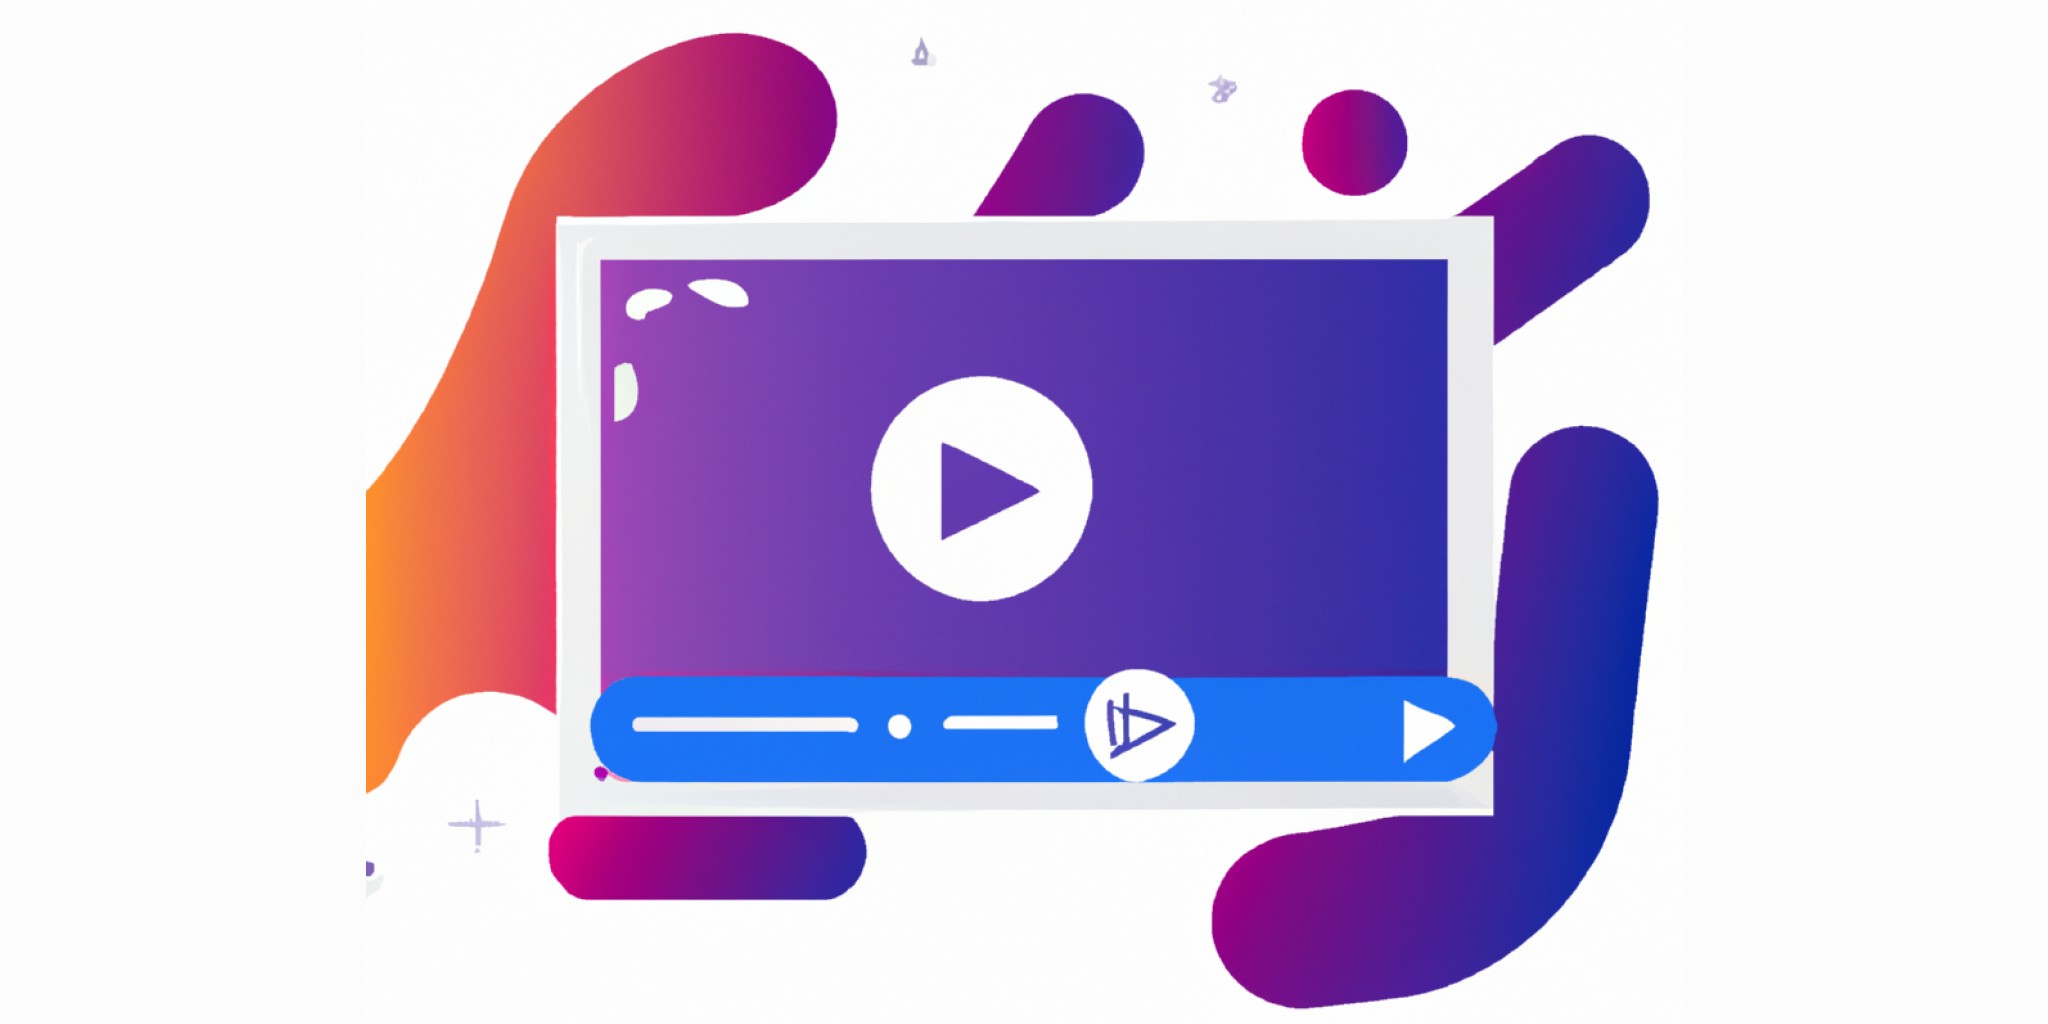 channel in front in flat illustration style with gradients and white background